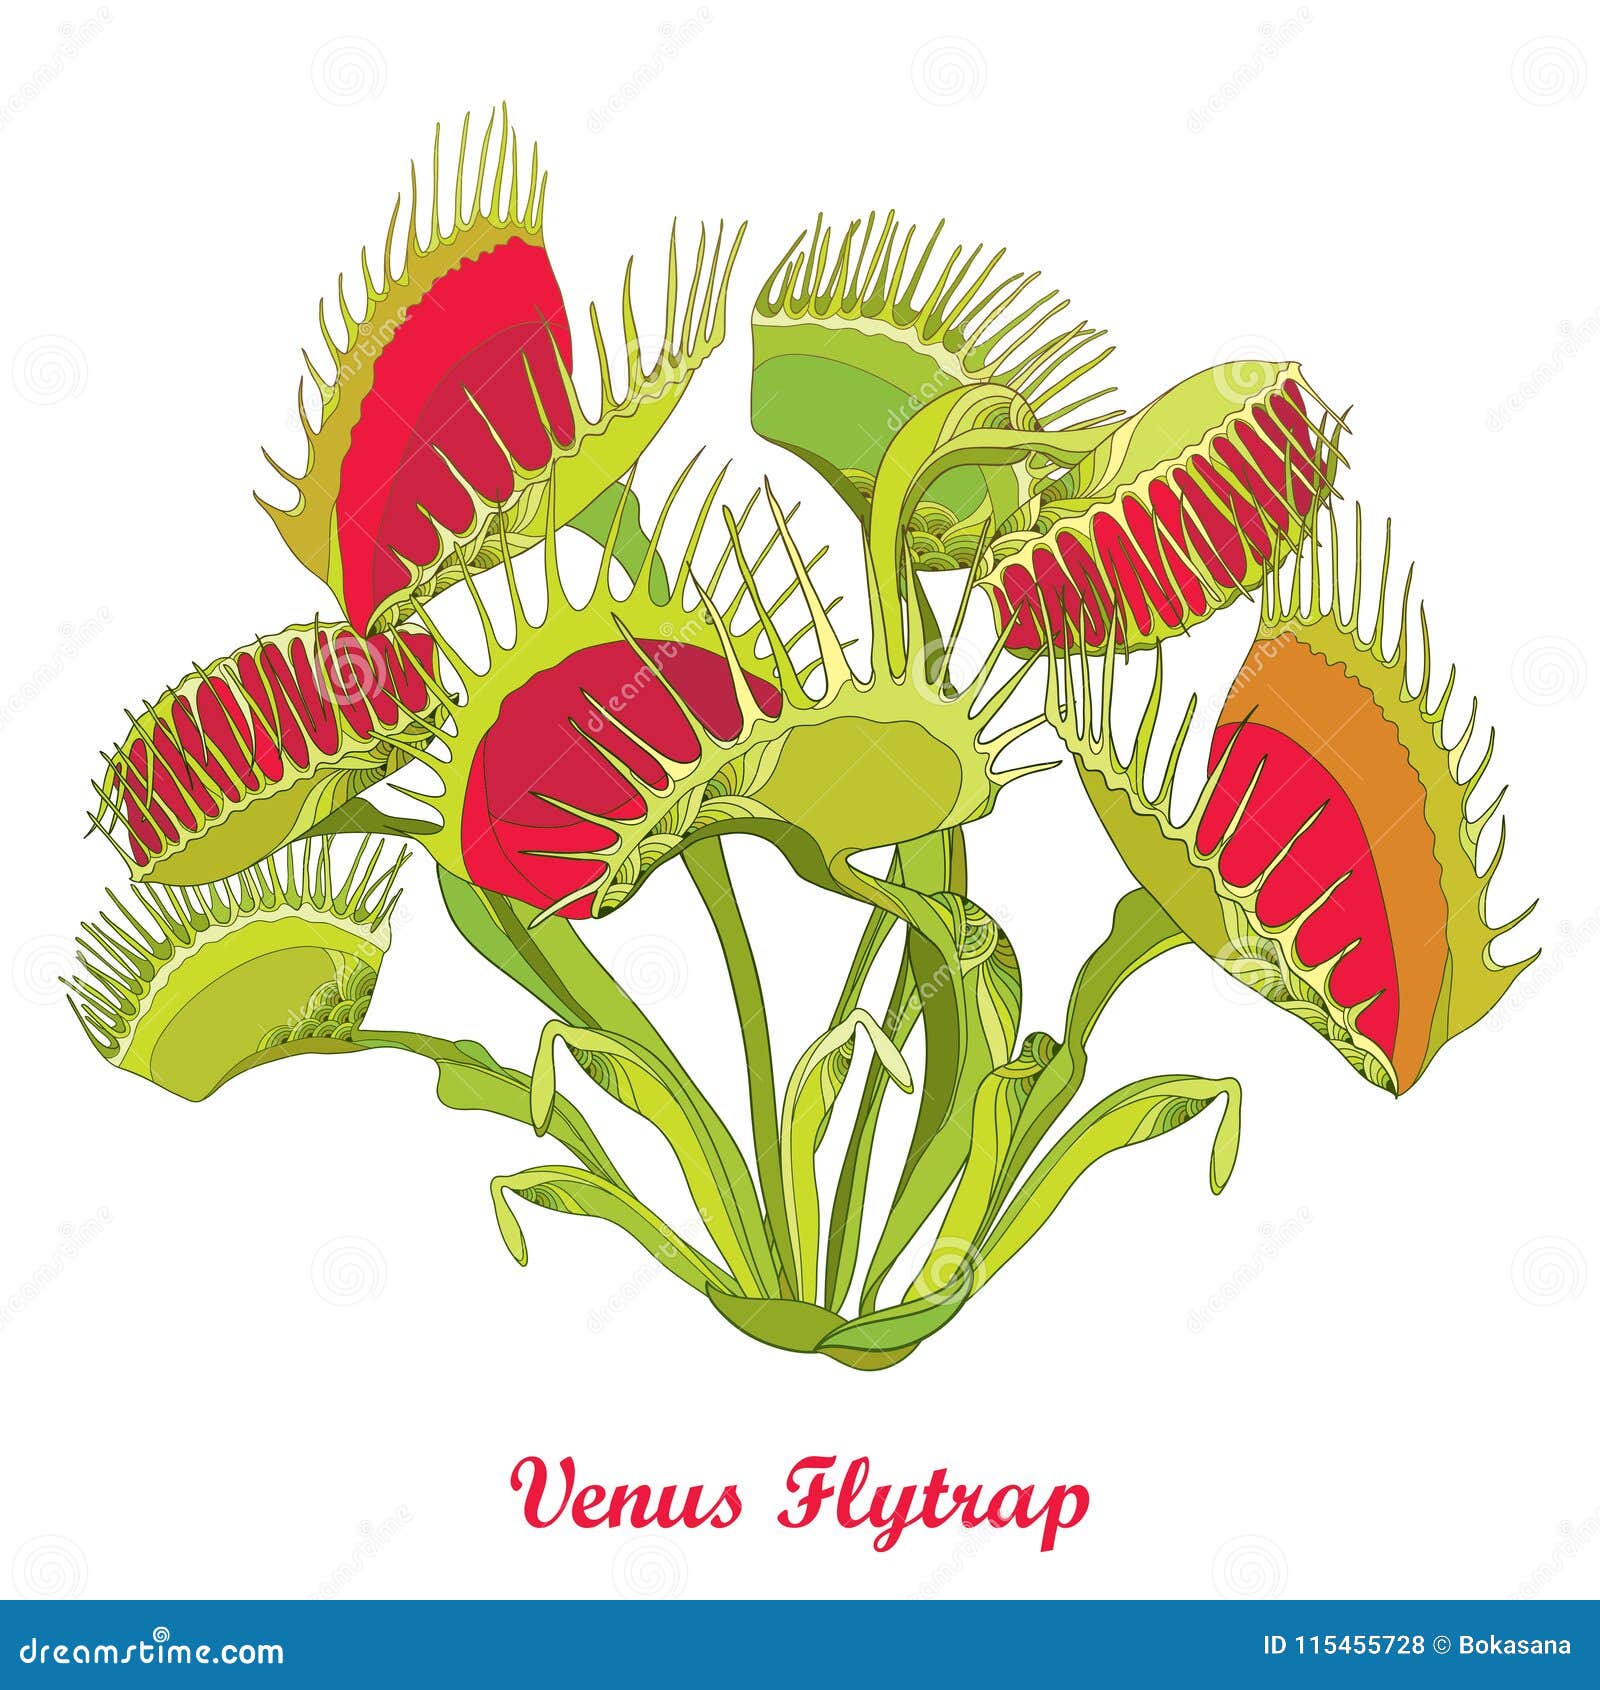  drawing of venus flytrap or dionaea muscipula with open and close trap in red and green  on white background.